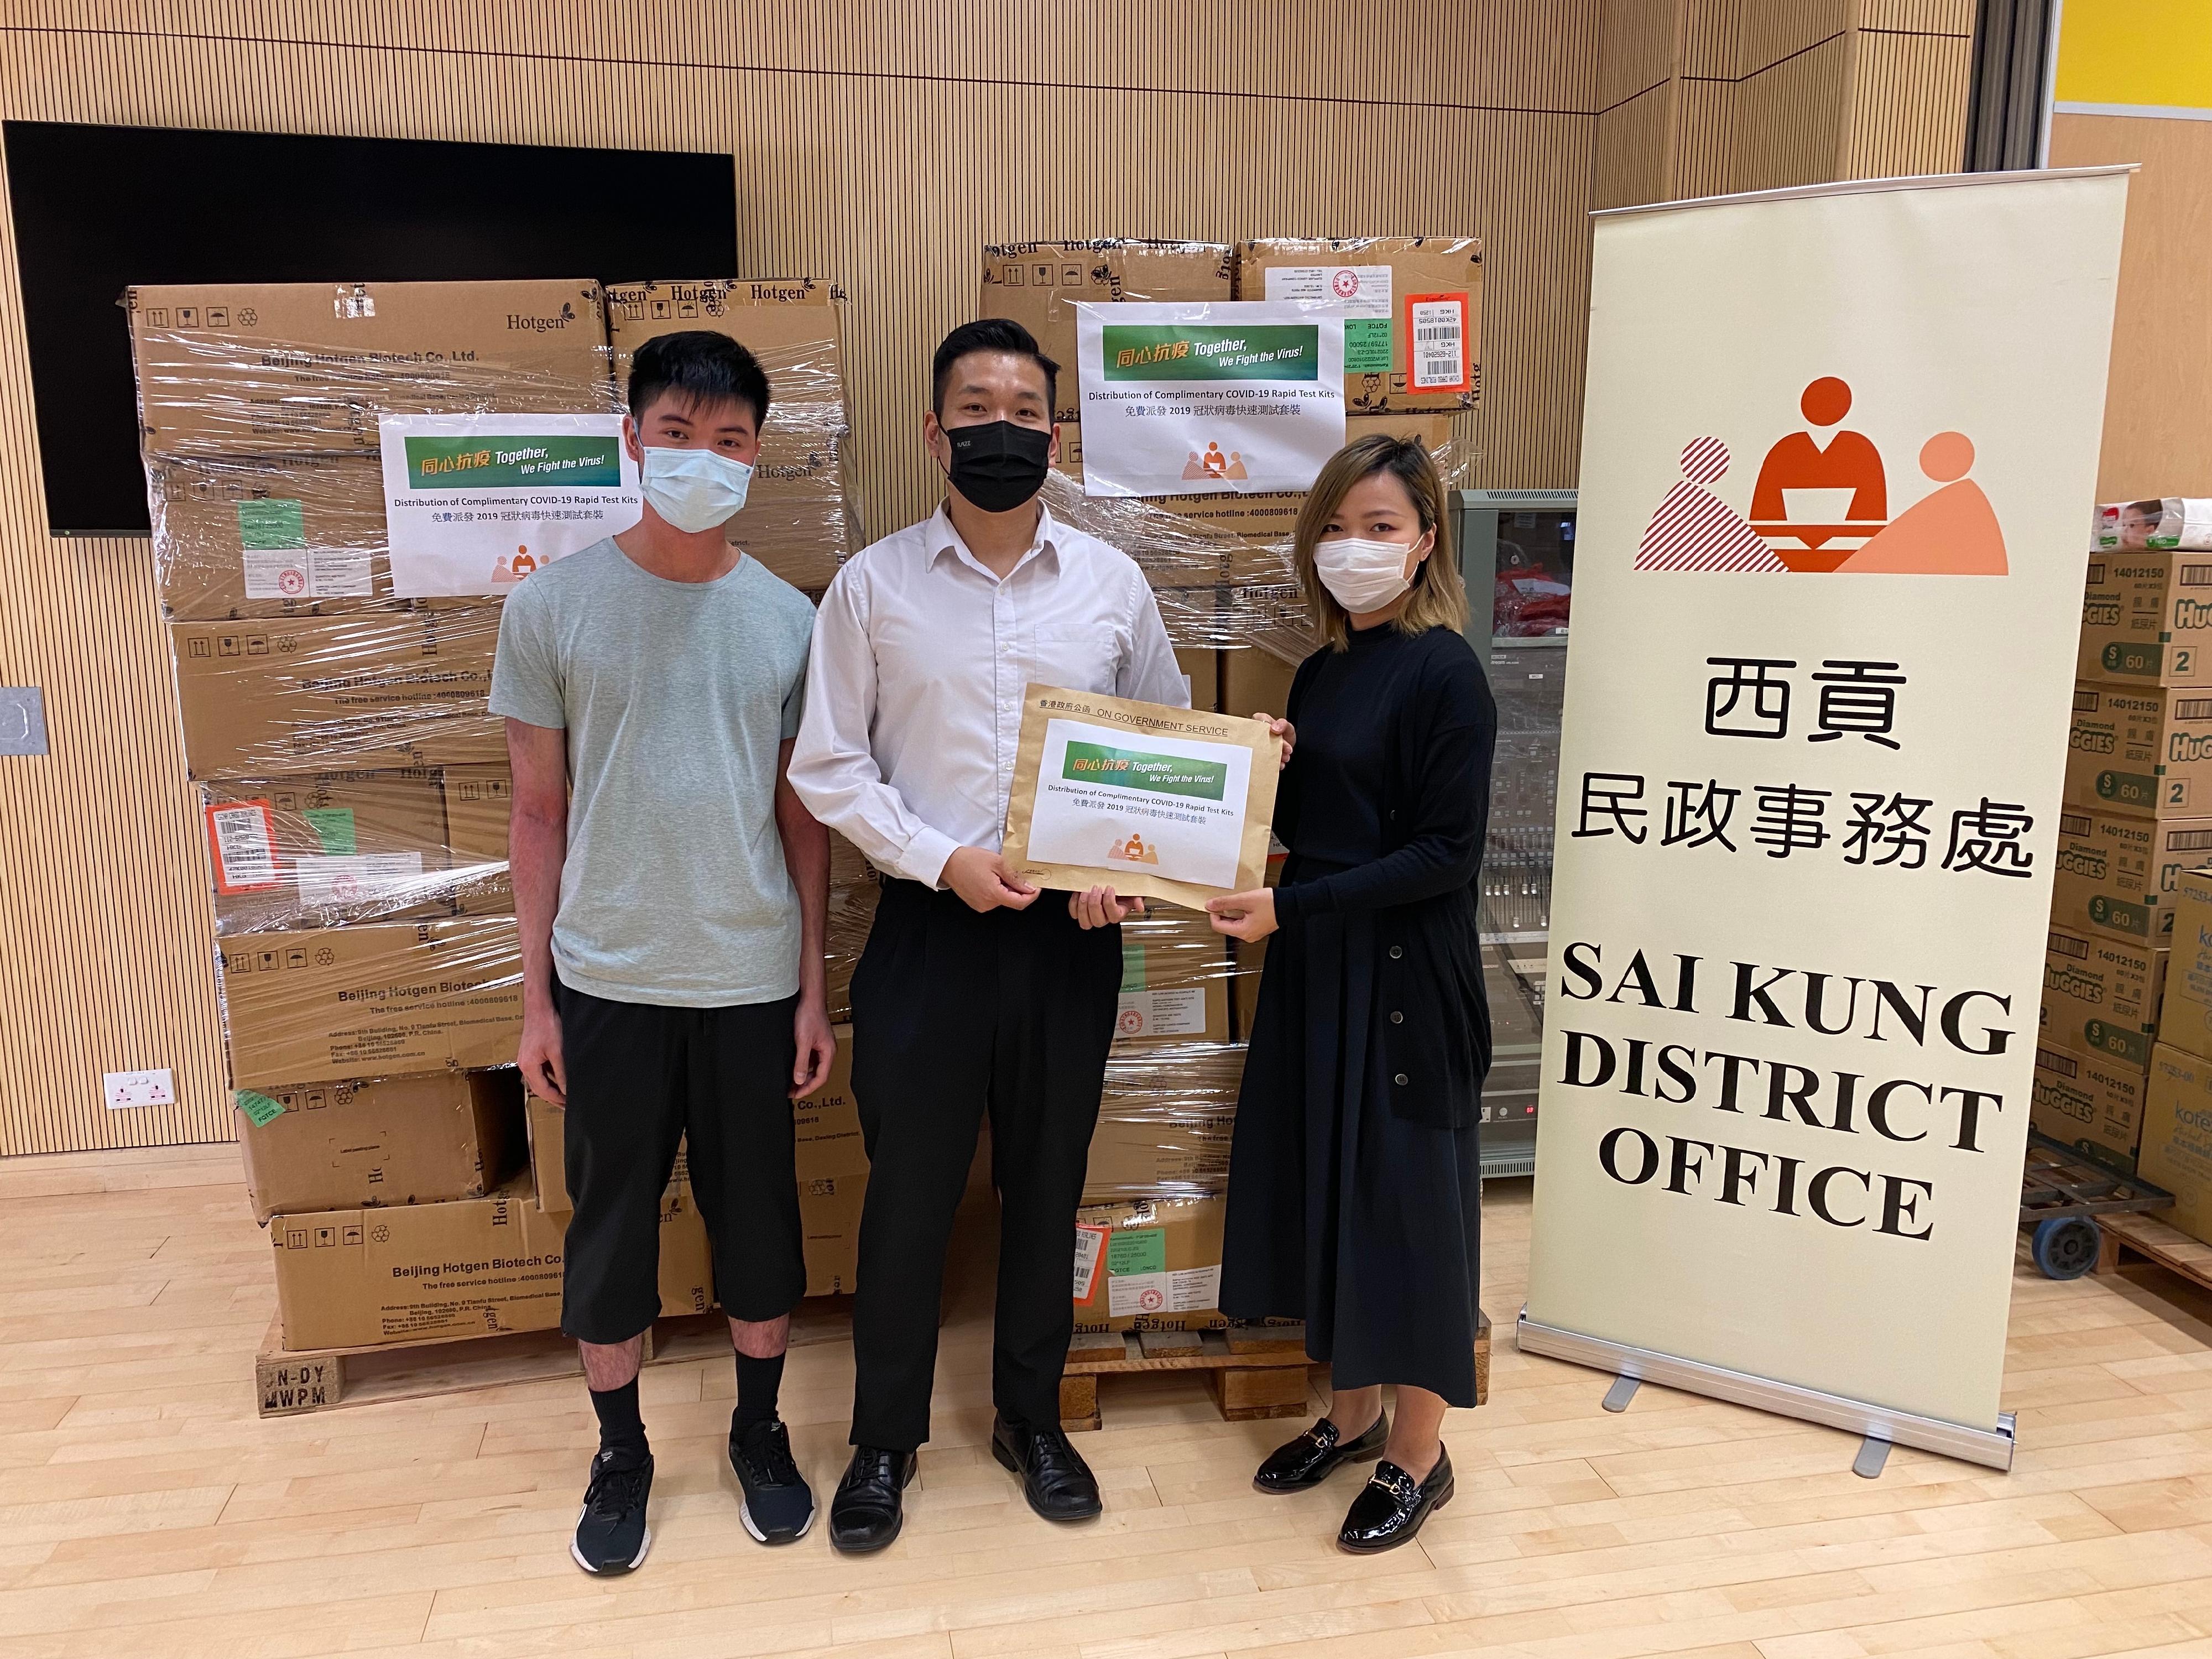 The Sai Kung District Office yesterday (April 21) distributed COVID-19 rapid test kits to households, cleansing workers and property management staff living and working in MALIBU, LOHAS Park, for voluntary testing through the property management company.